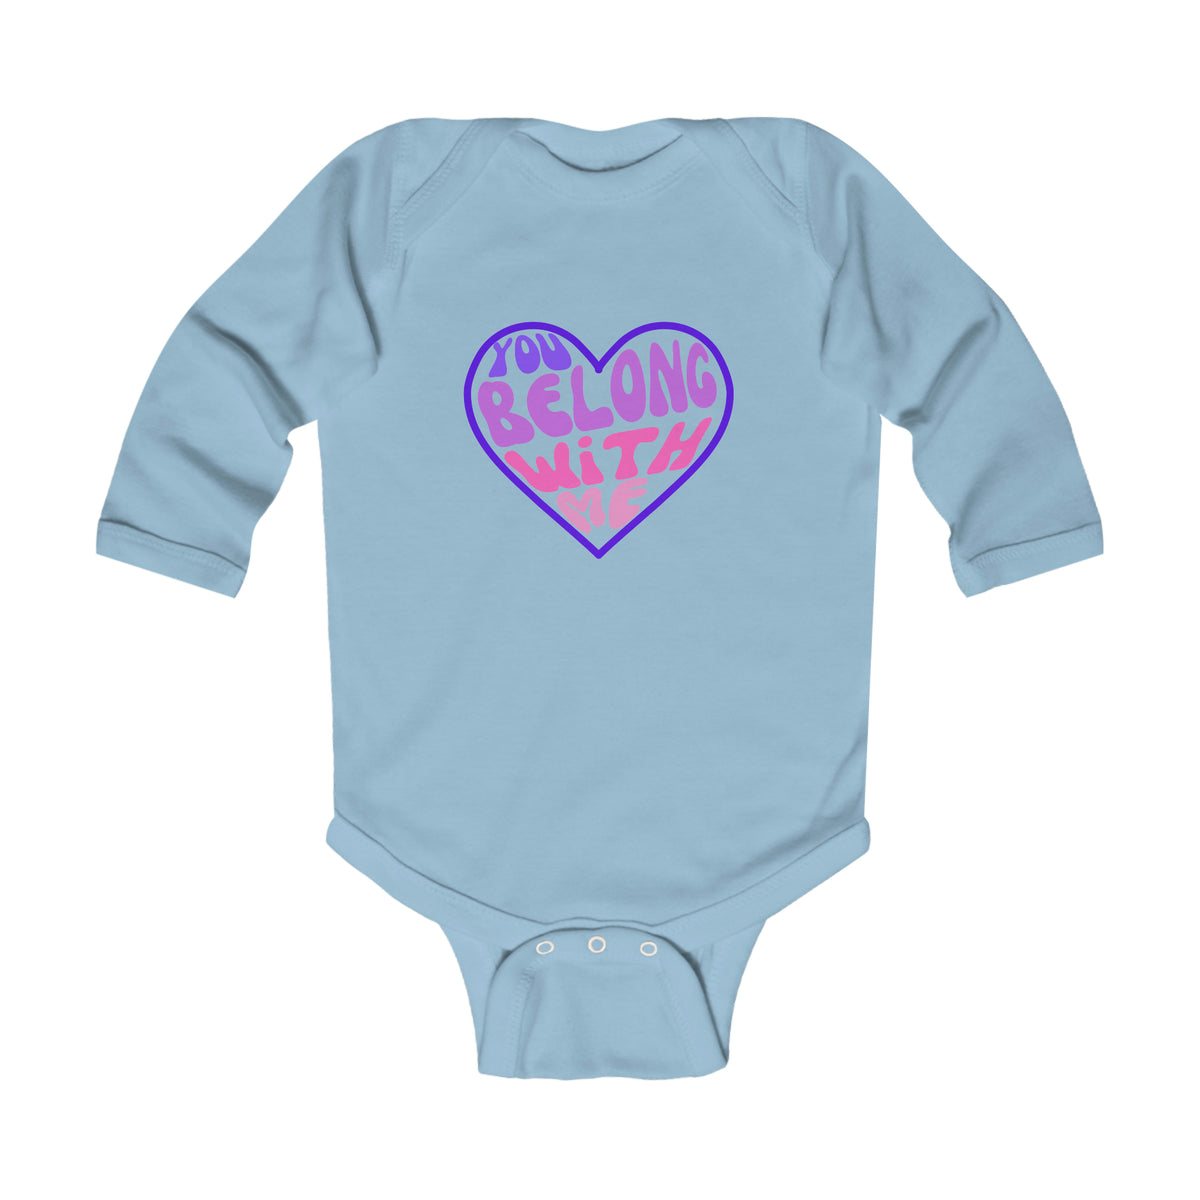 You Belong With Me Infant Long Sleeve Bodysuit, Baby Valentines Onesie, XOXO Baby Shirt, Matching Family Vday Shirts